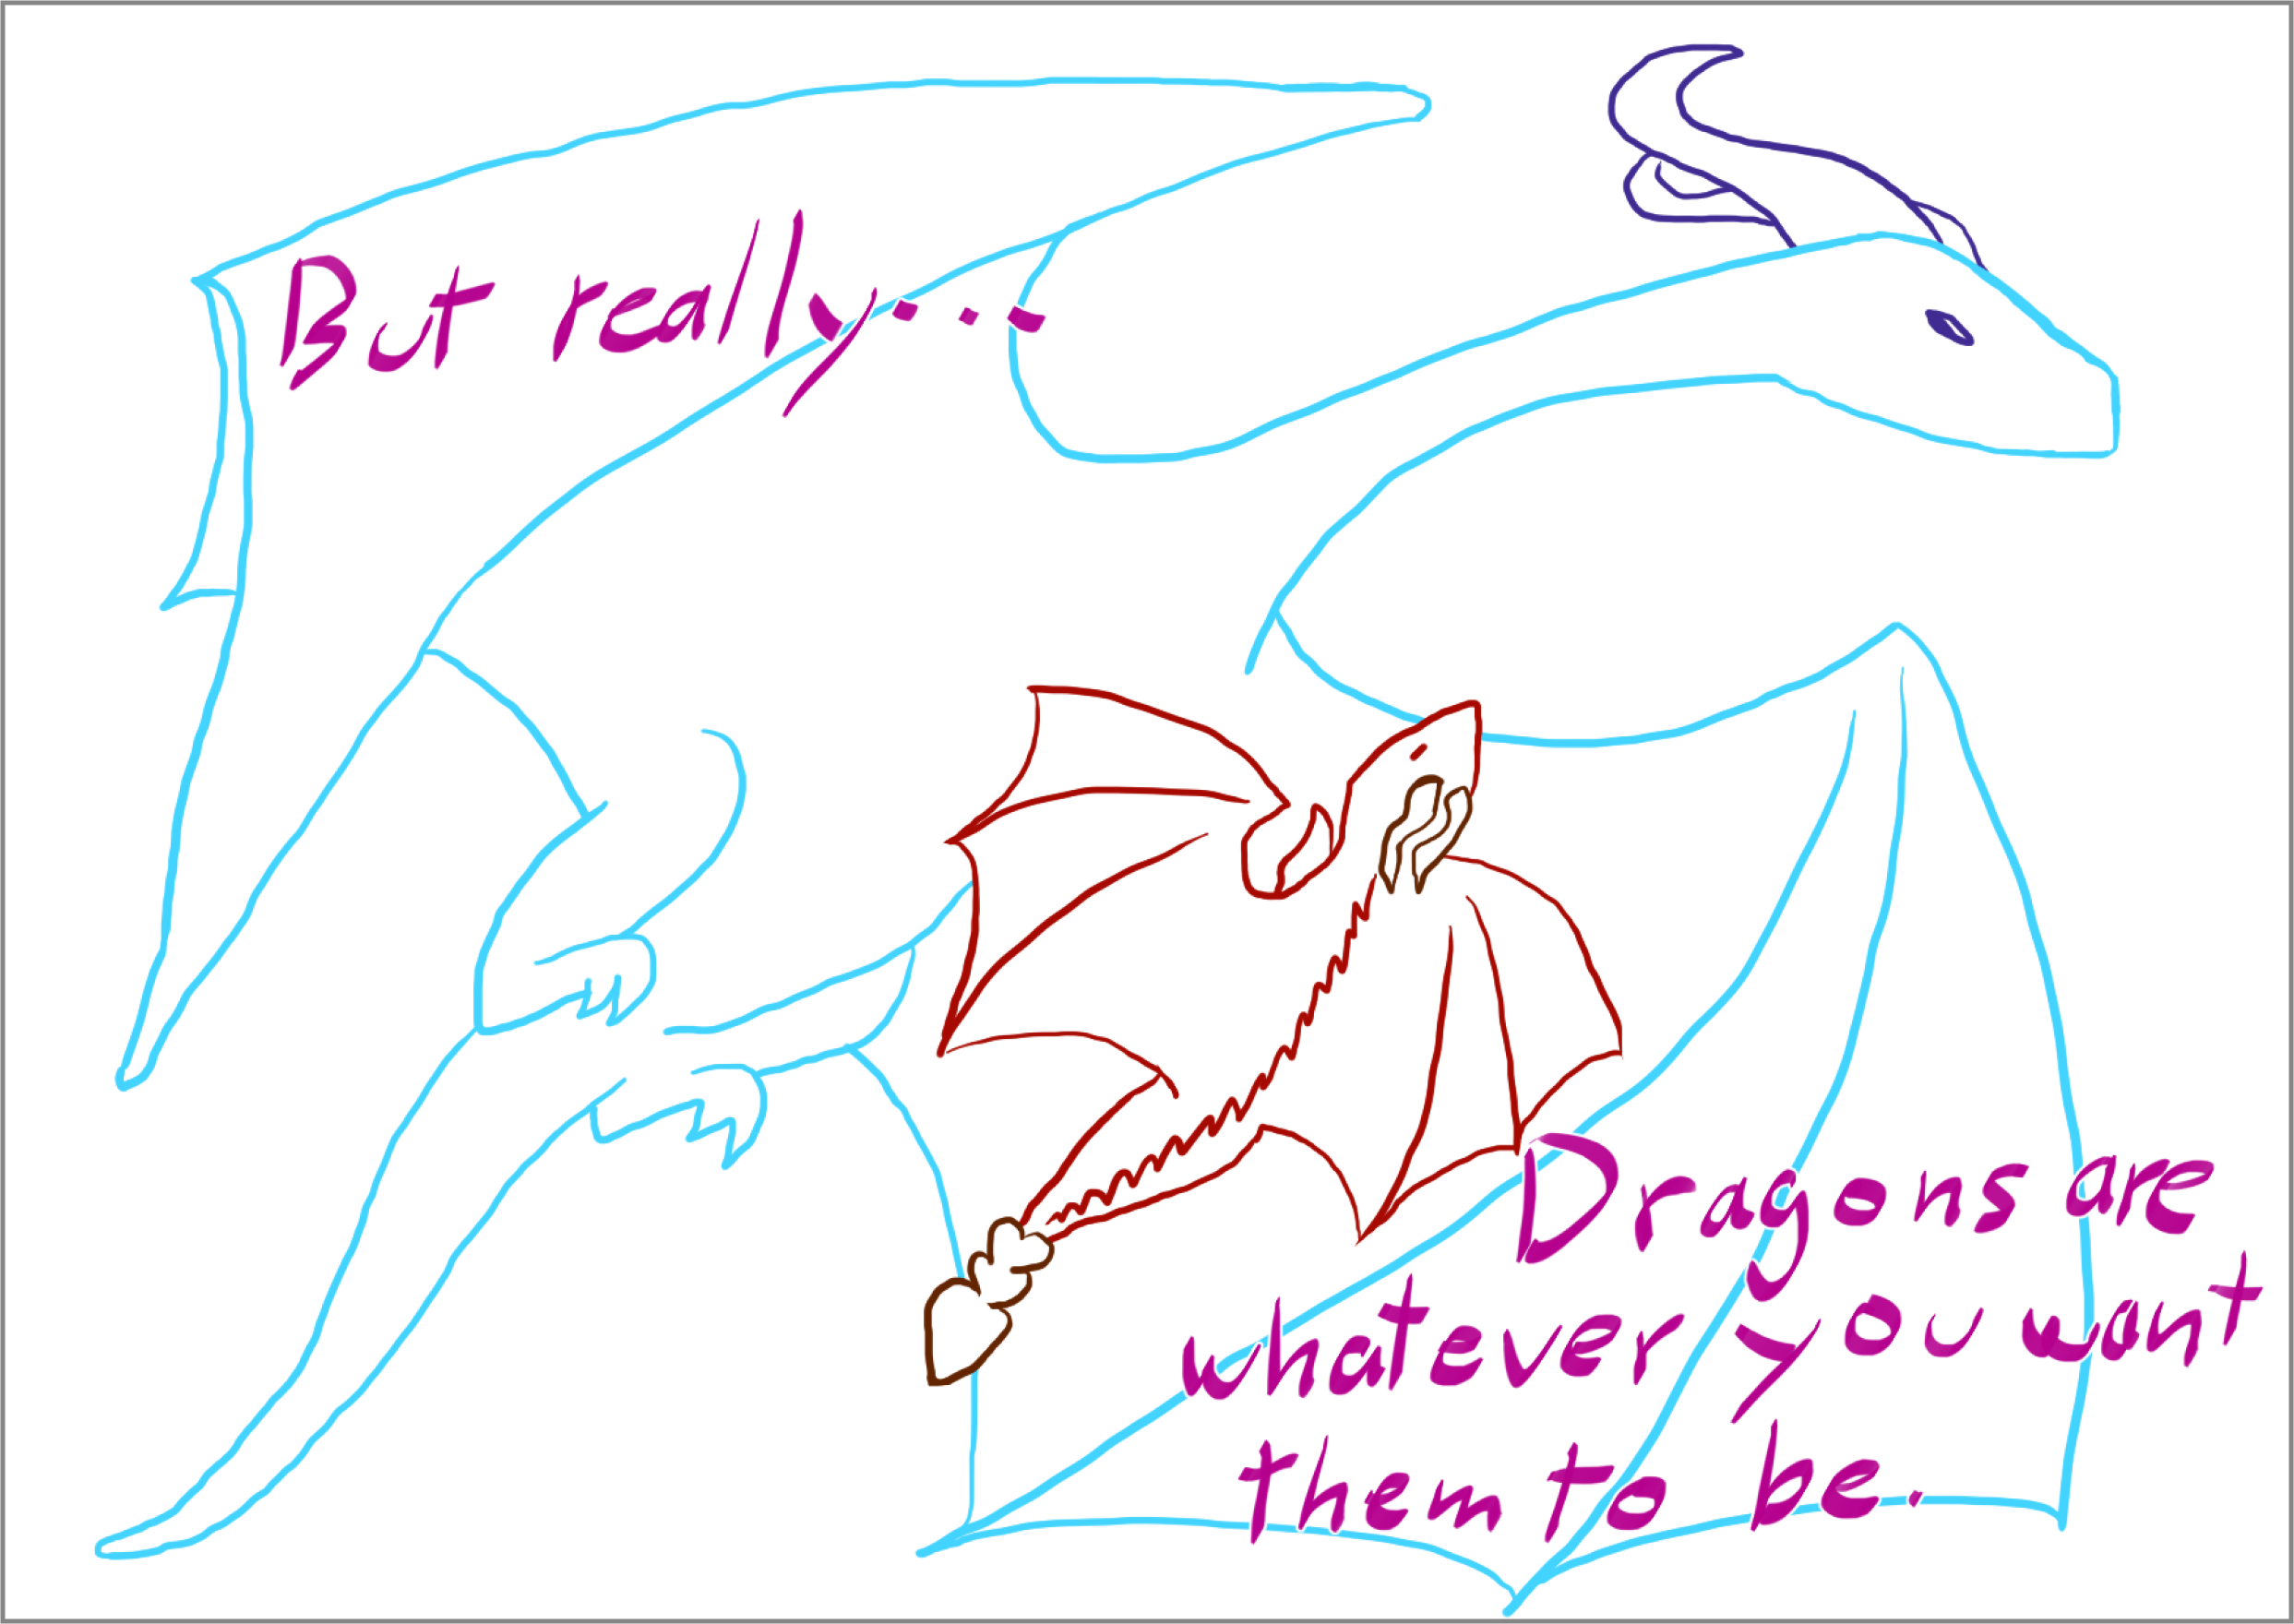 'But really, dragons are whatever you want them to be.' a large blue dragon flying alongside a small brown dragon, lineart